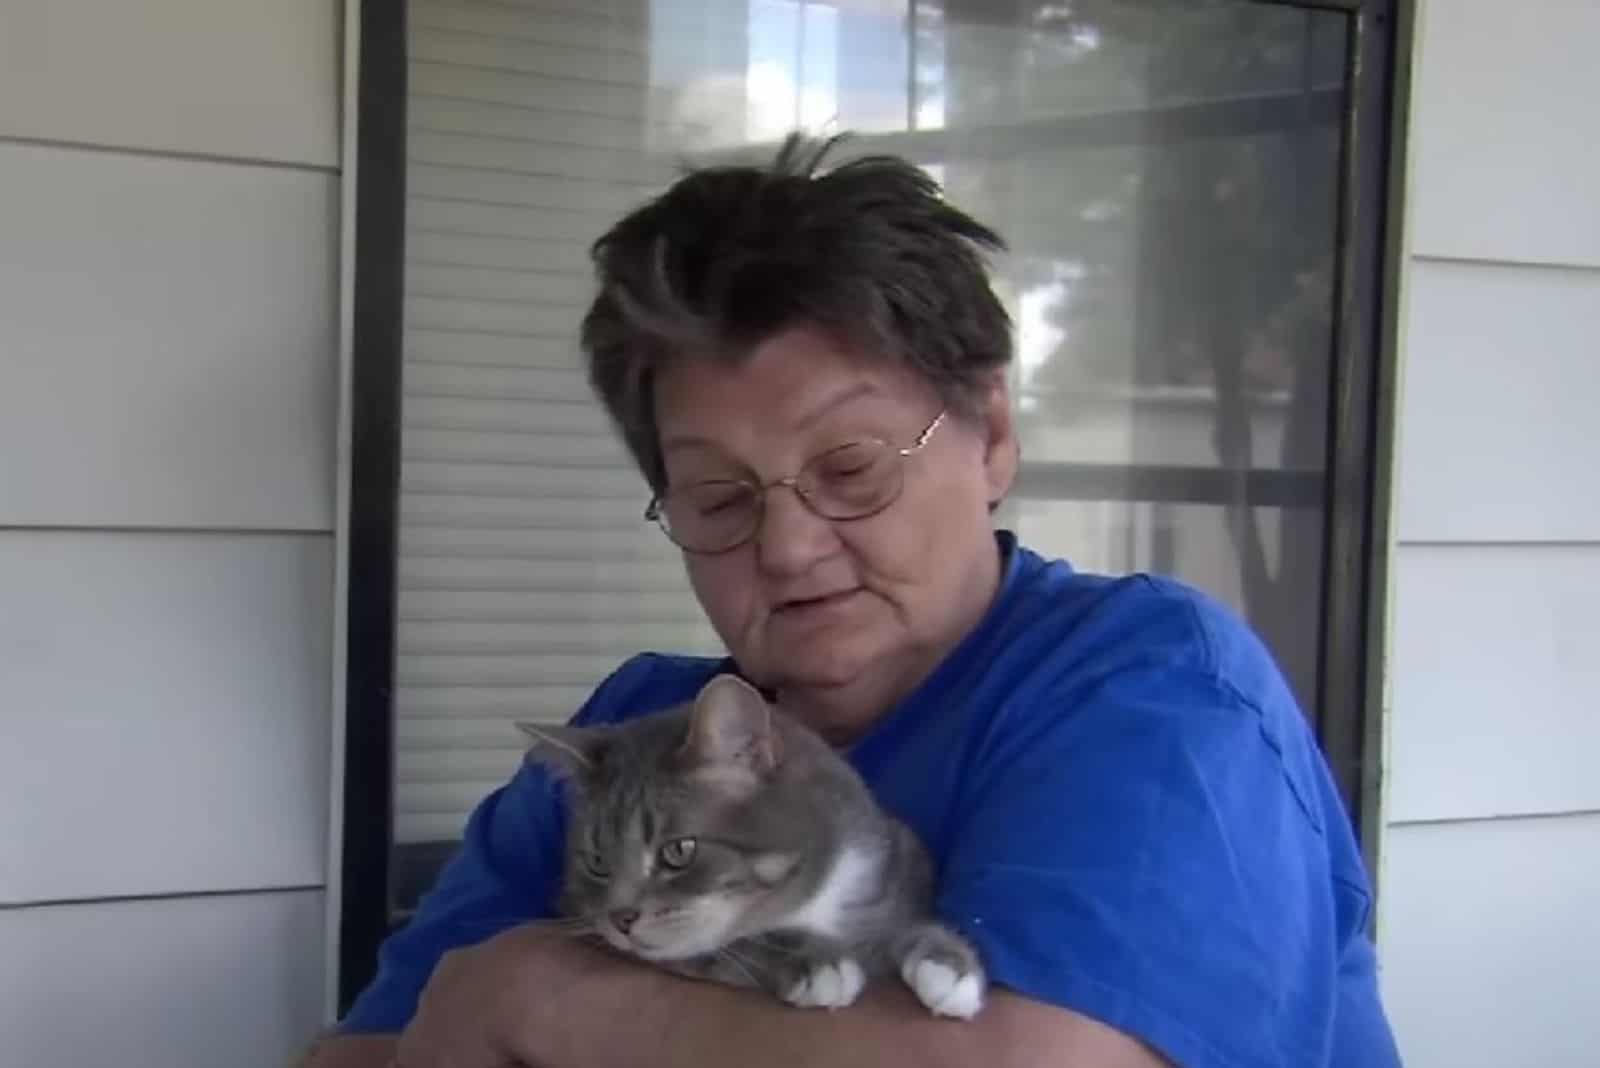 a woman with glasses holds a cat in her arms